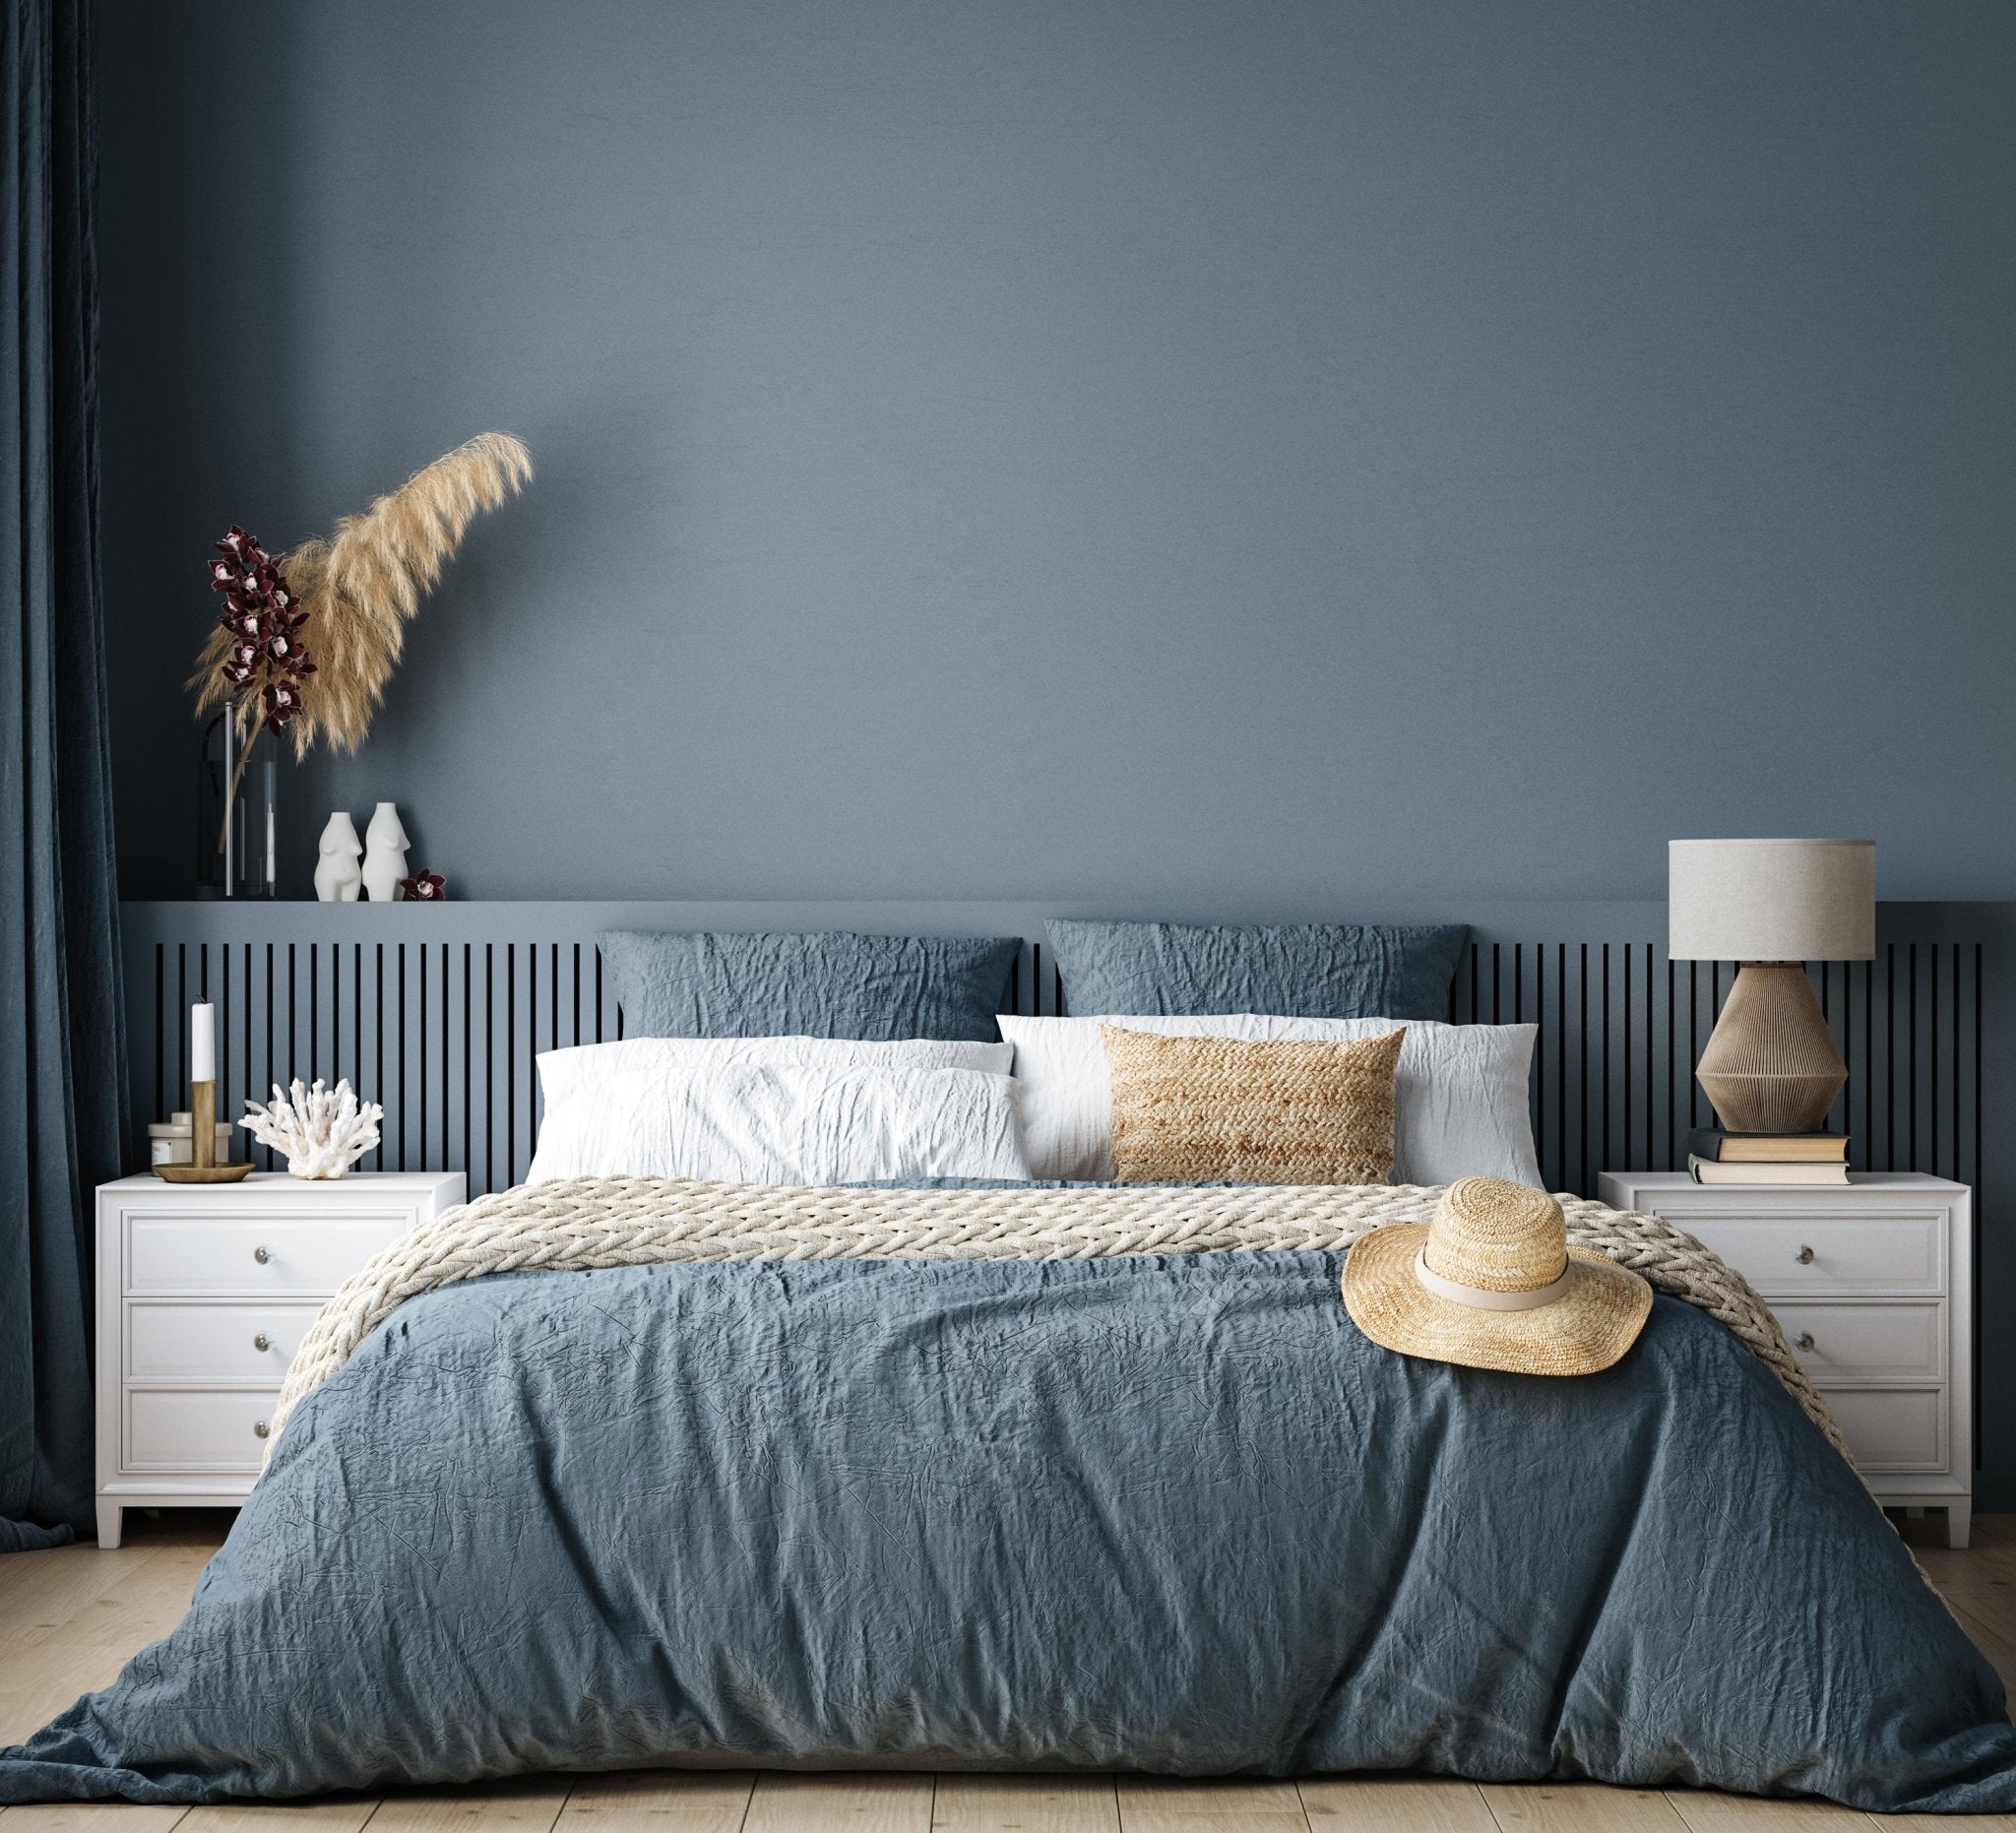 Mastering the Art of decorating your master bedroom walls - About Wall Art